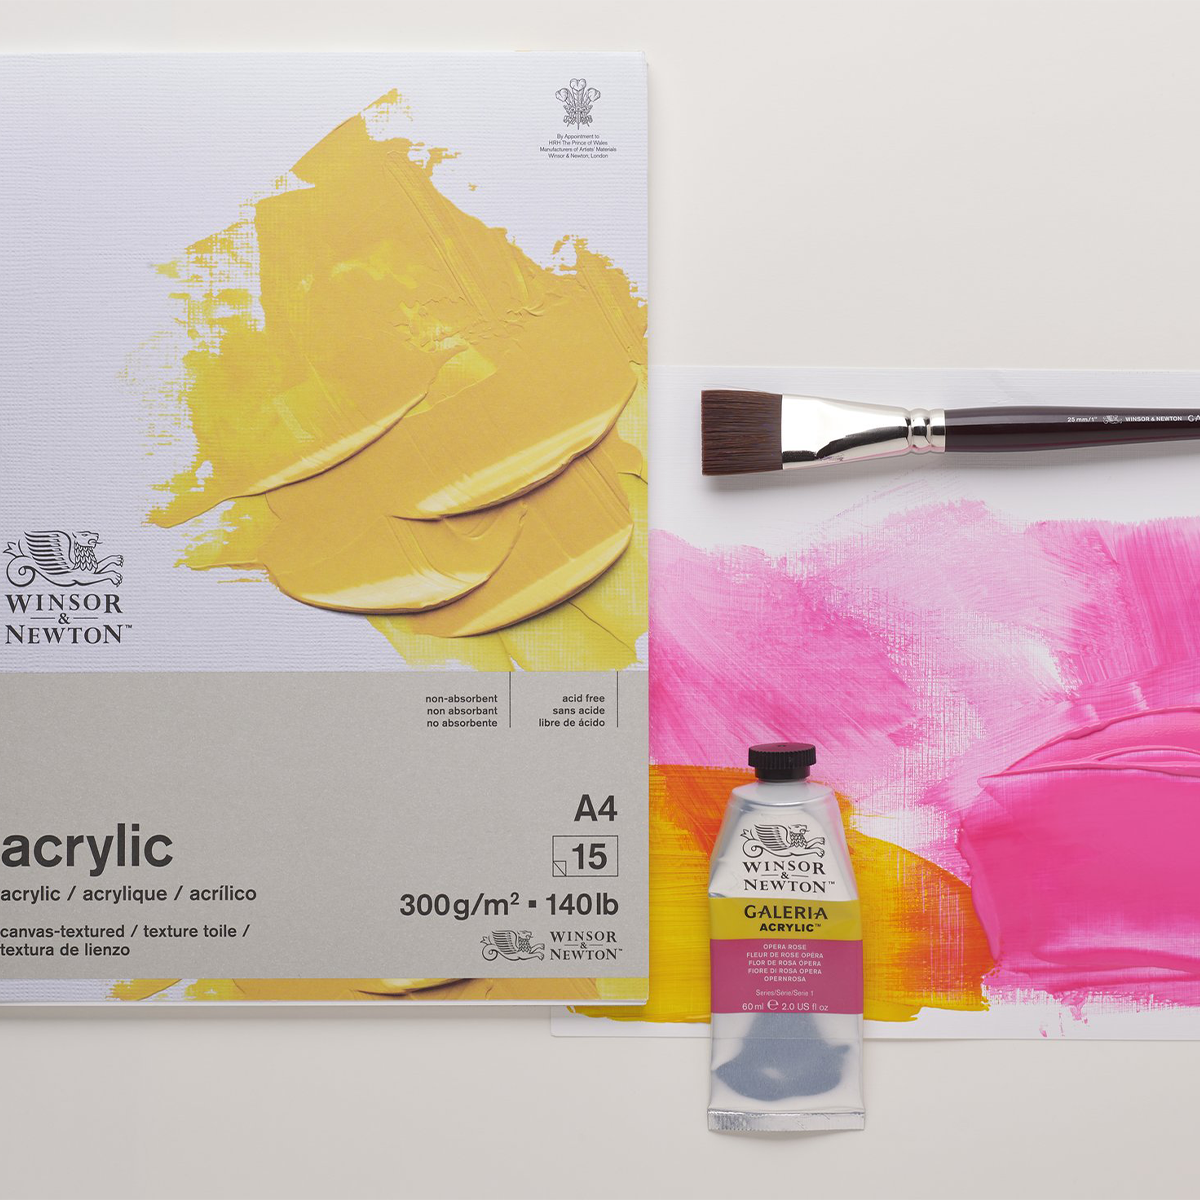 Acrylic Pad A4 300g in the group Paper & Pads / Artist Pads & Paper / Acrylic Pads at Pen Store (128701)